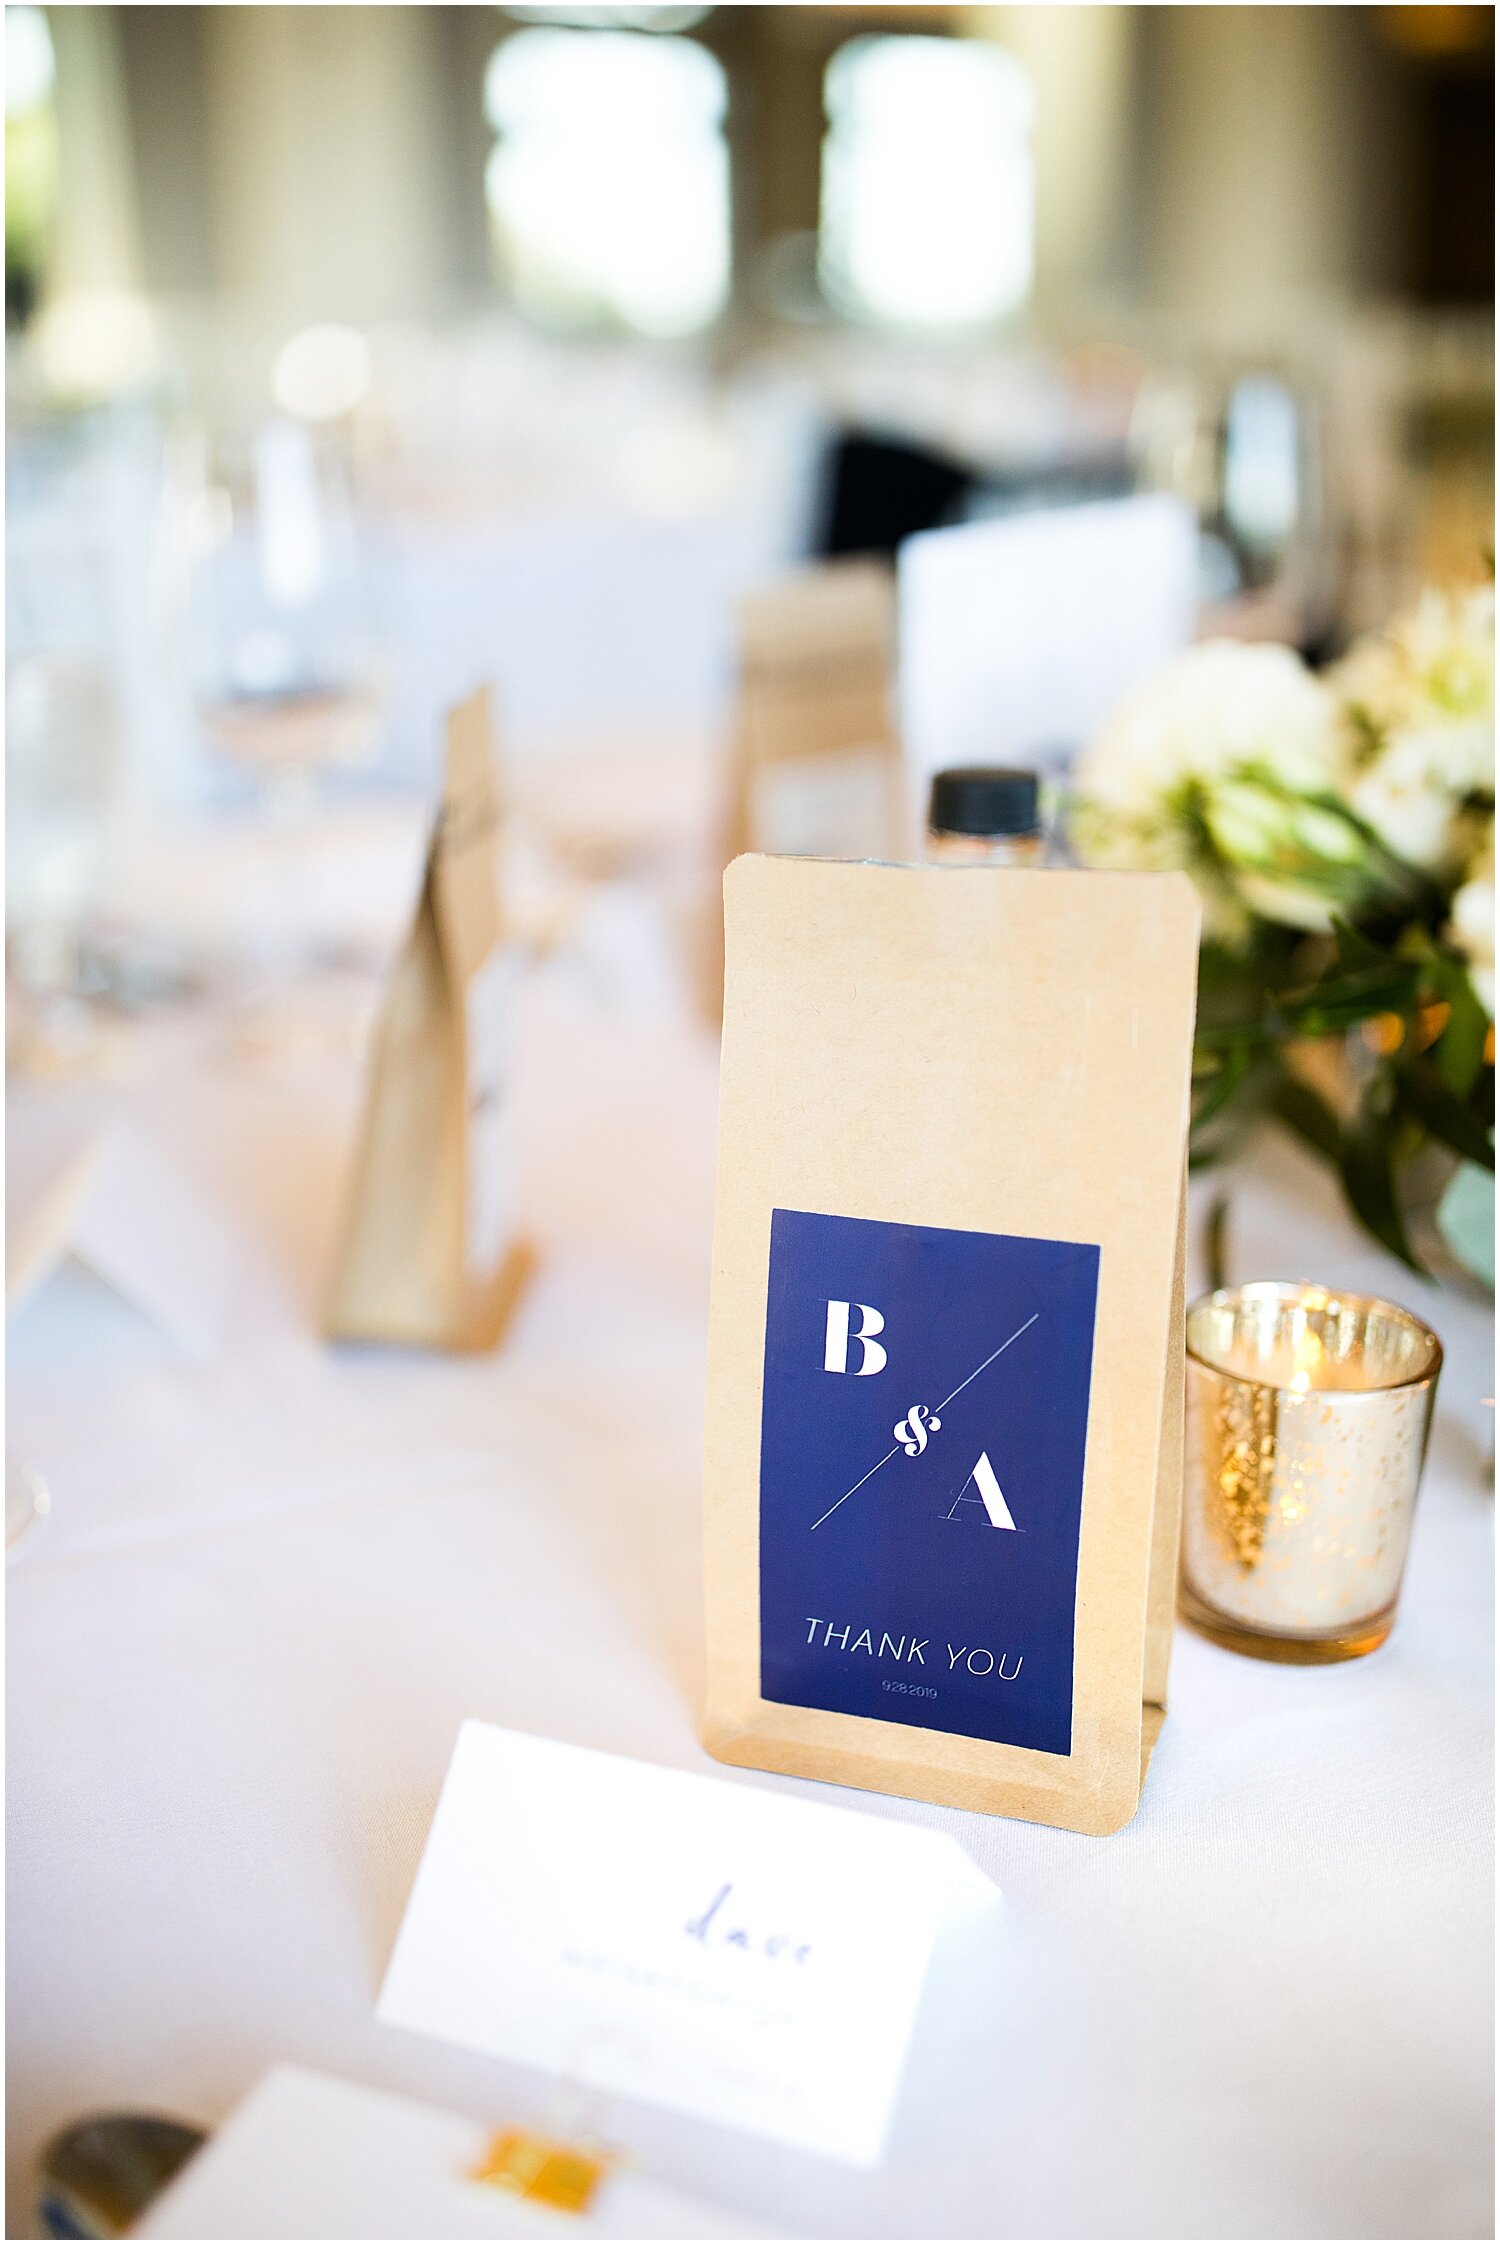  wedding favor bags for the wedding guests 